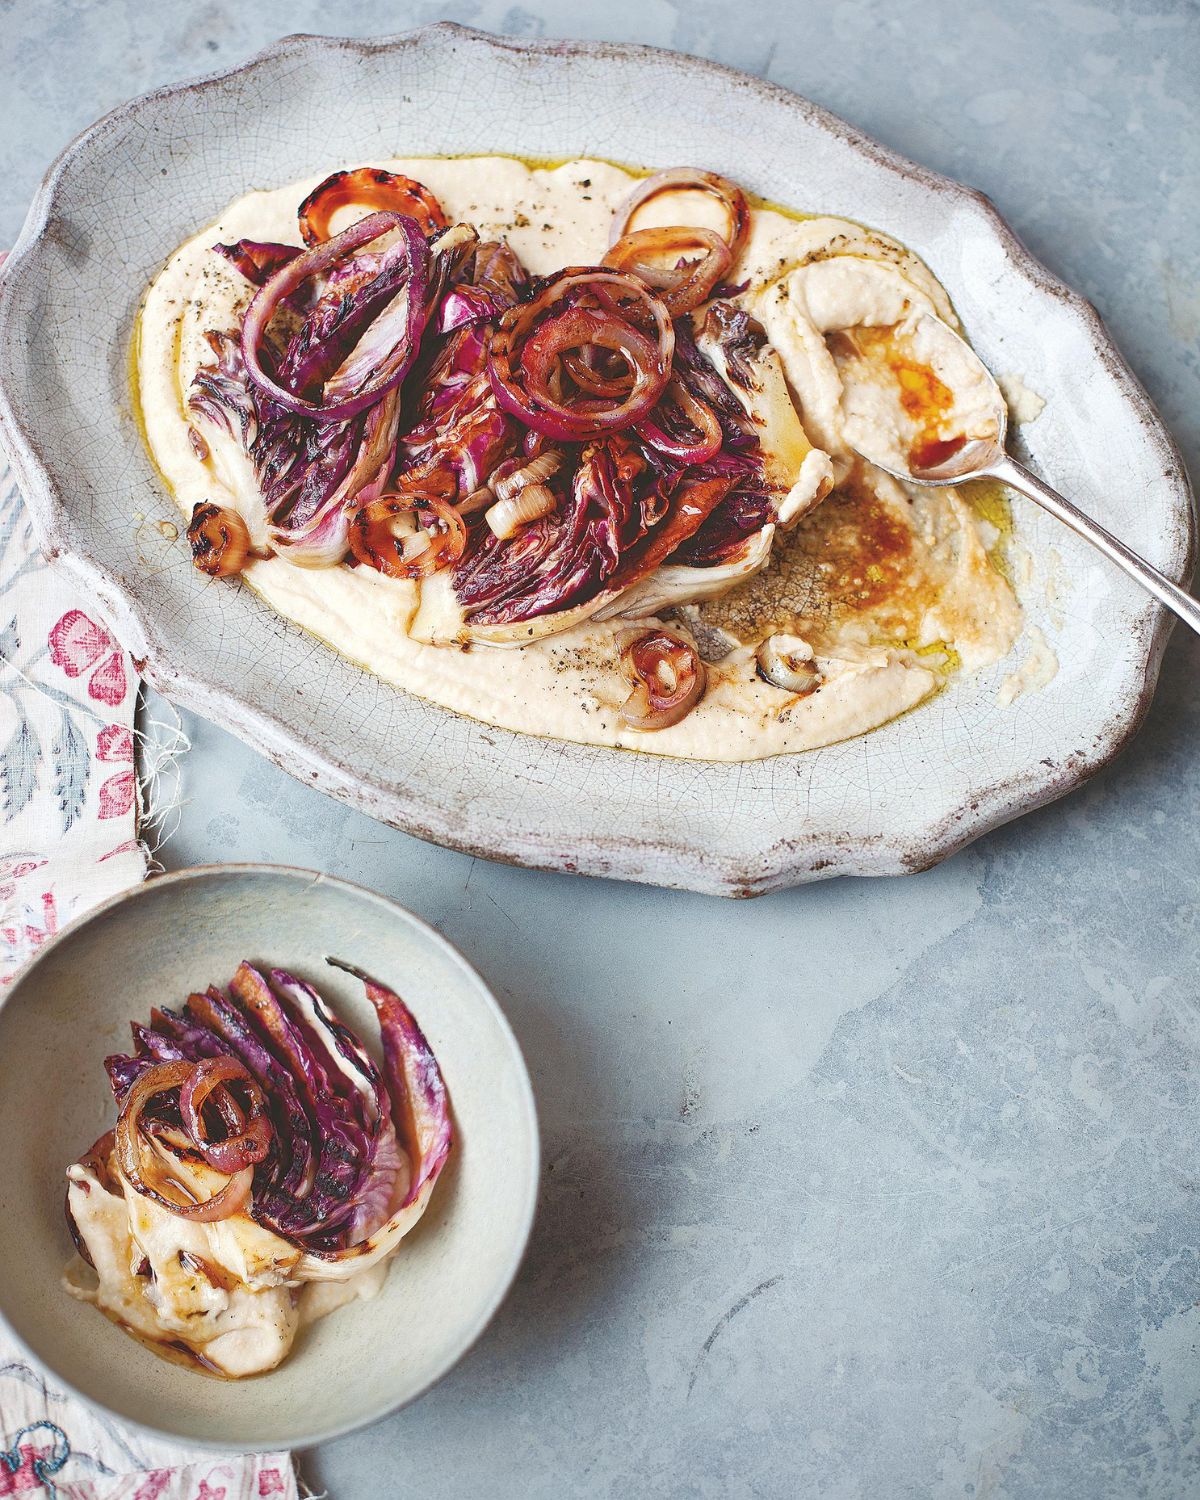 Radicchio and Red Onions on White Bean Puree from A Change of Appetite by Diana Henry